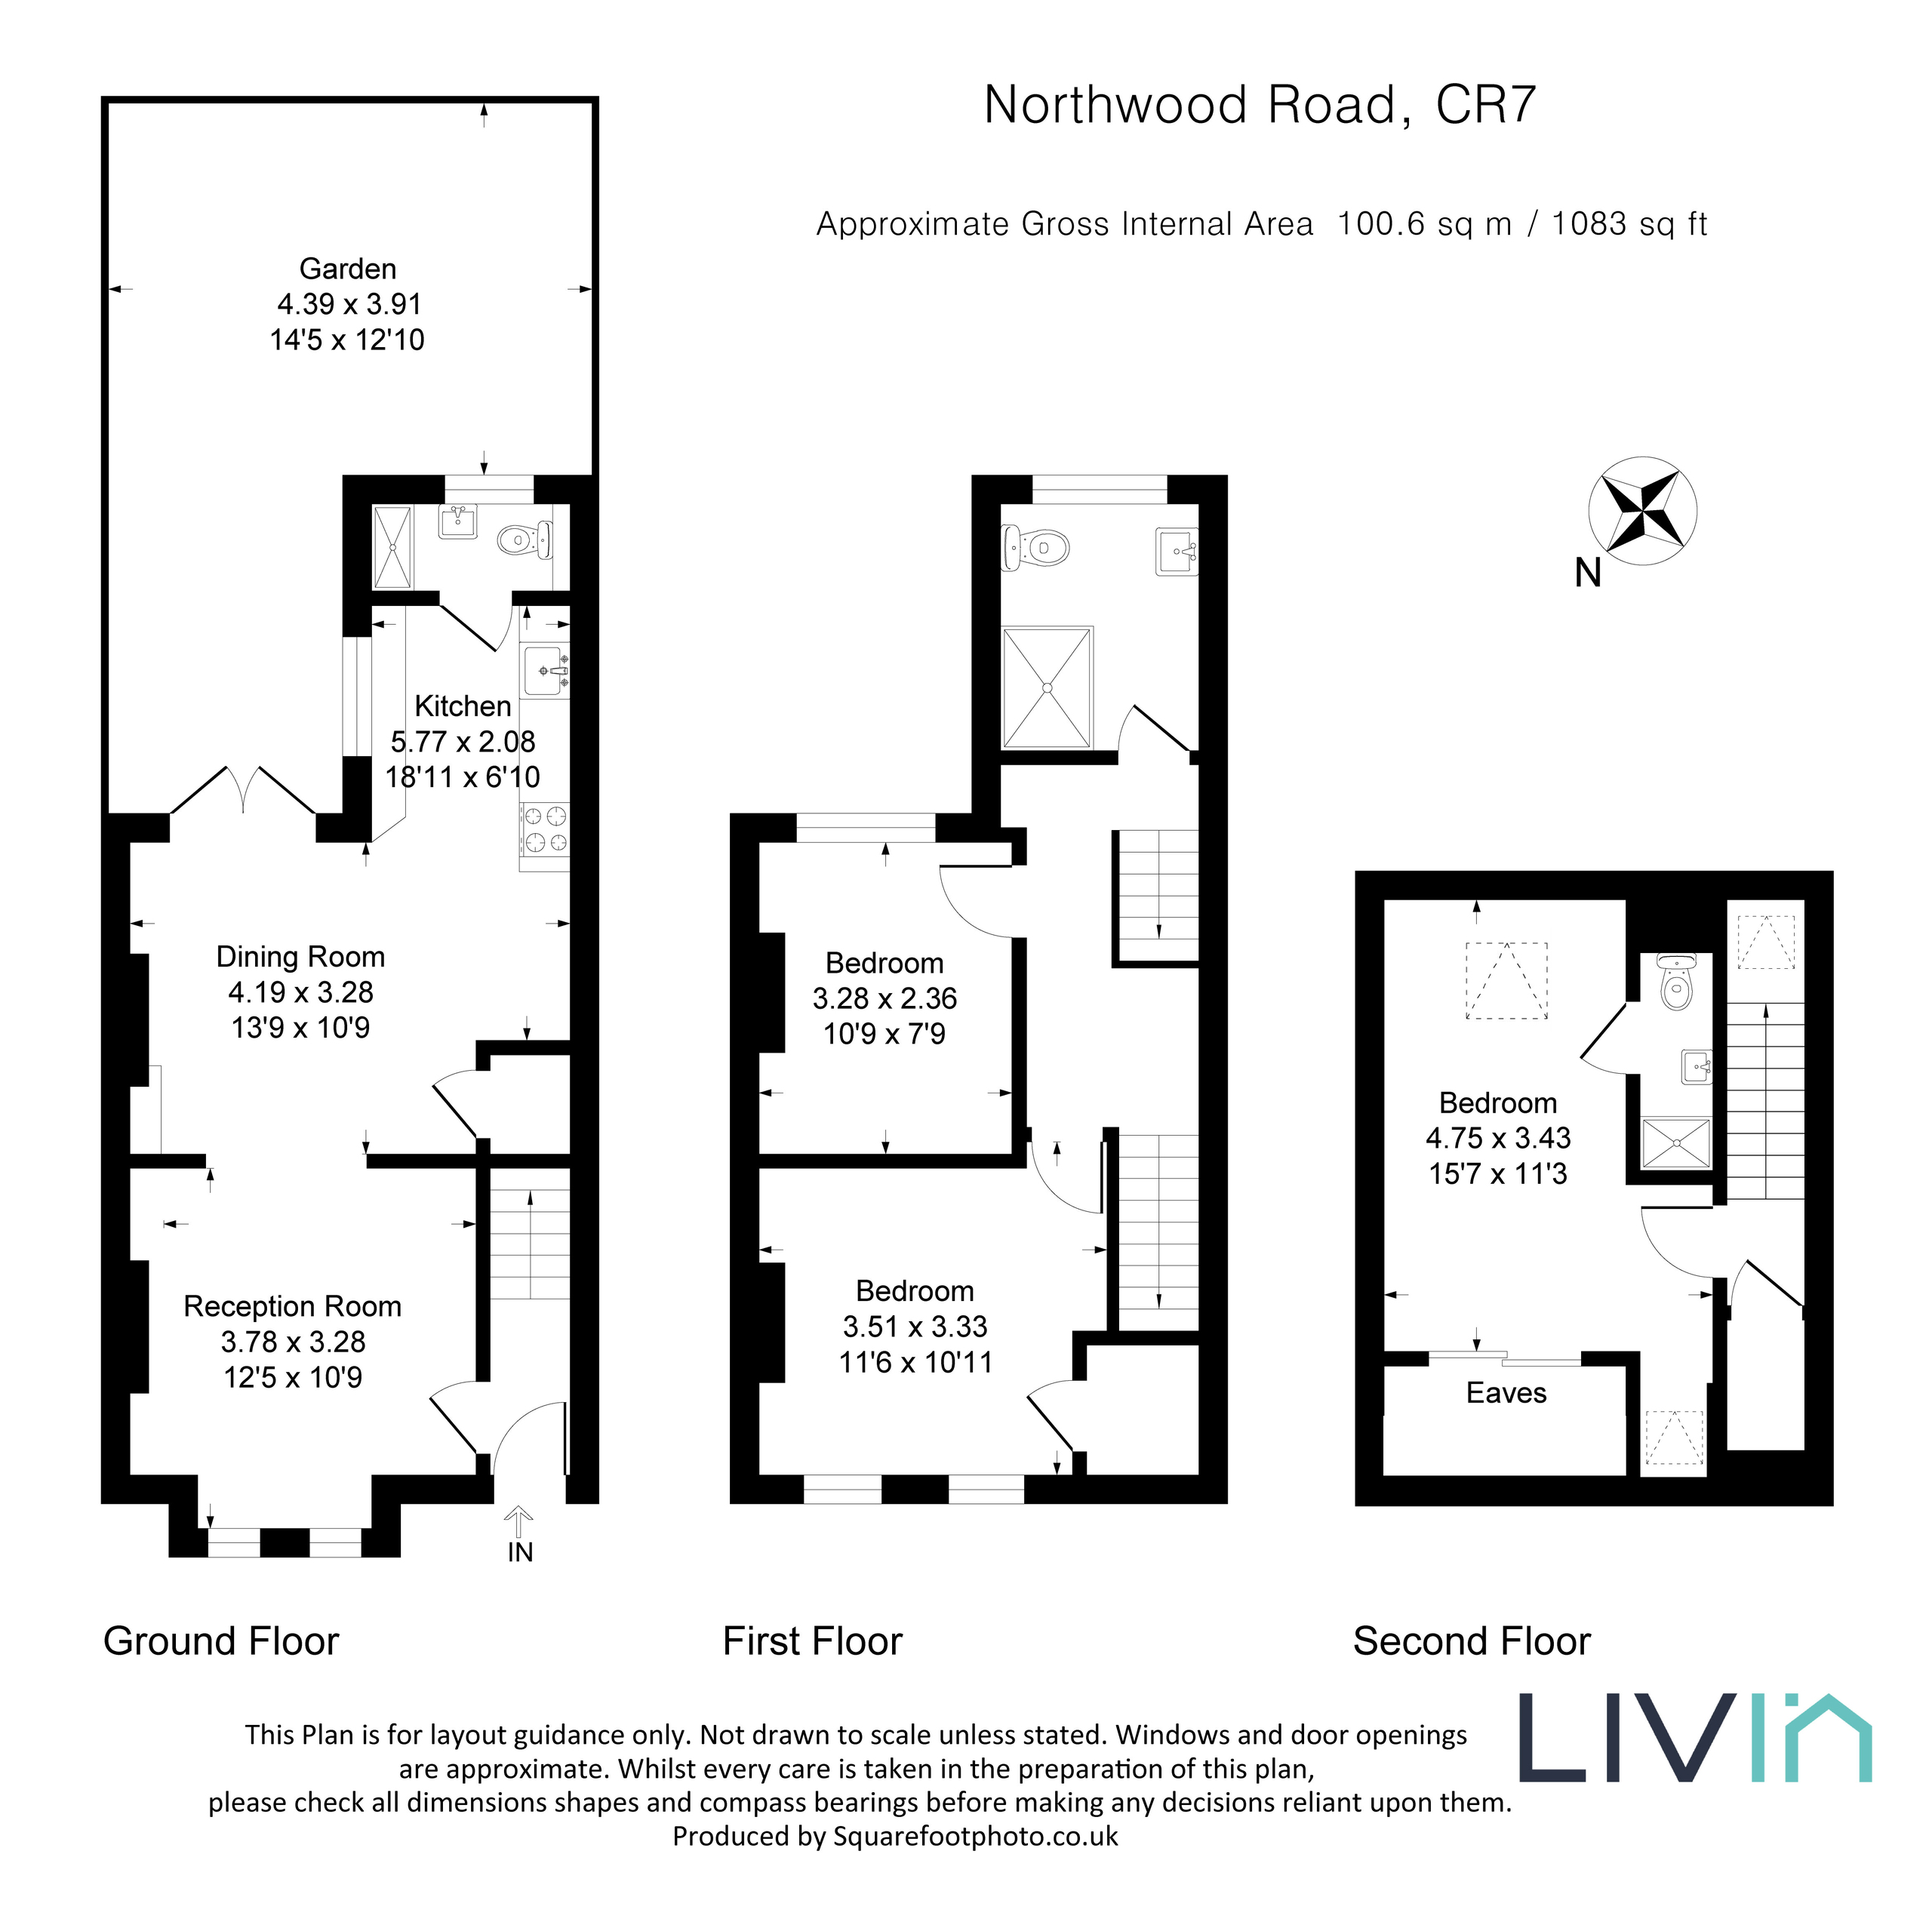 3 bed end of terrace house for sale in Northwood Road, Thornton Heath - Property floorplan